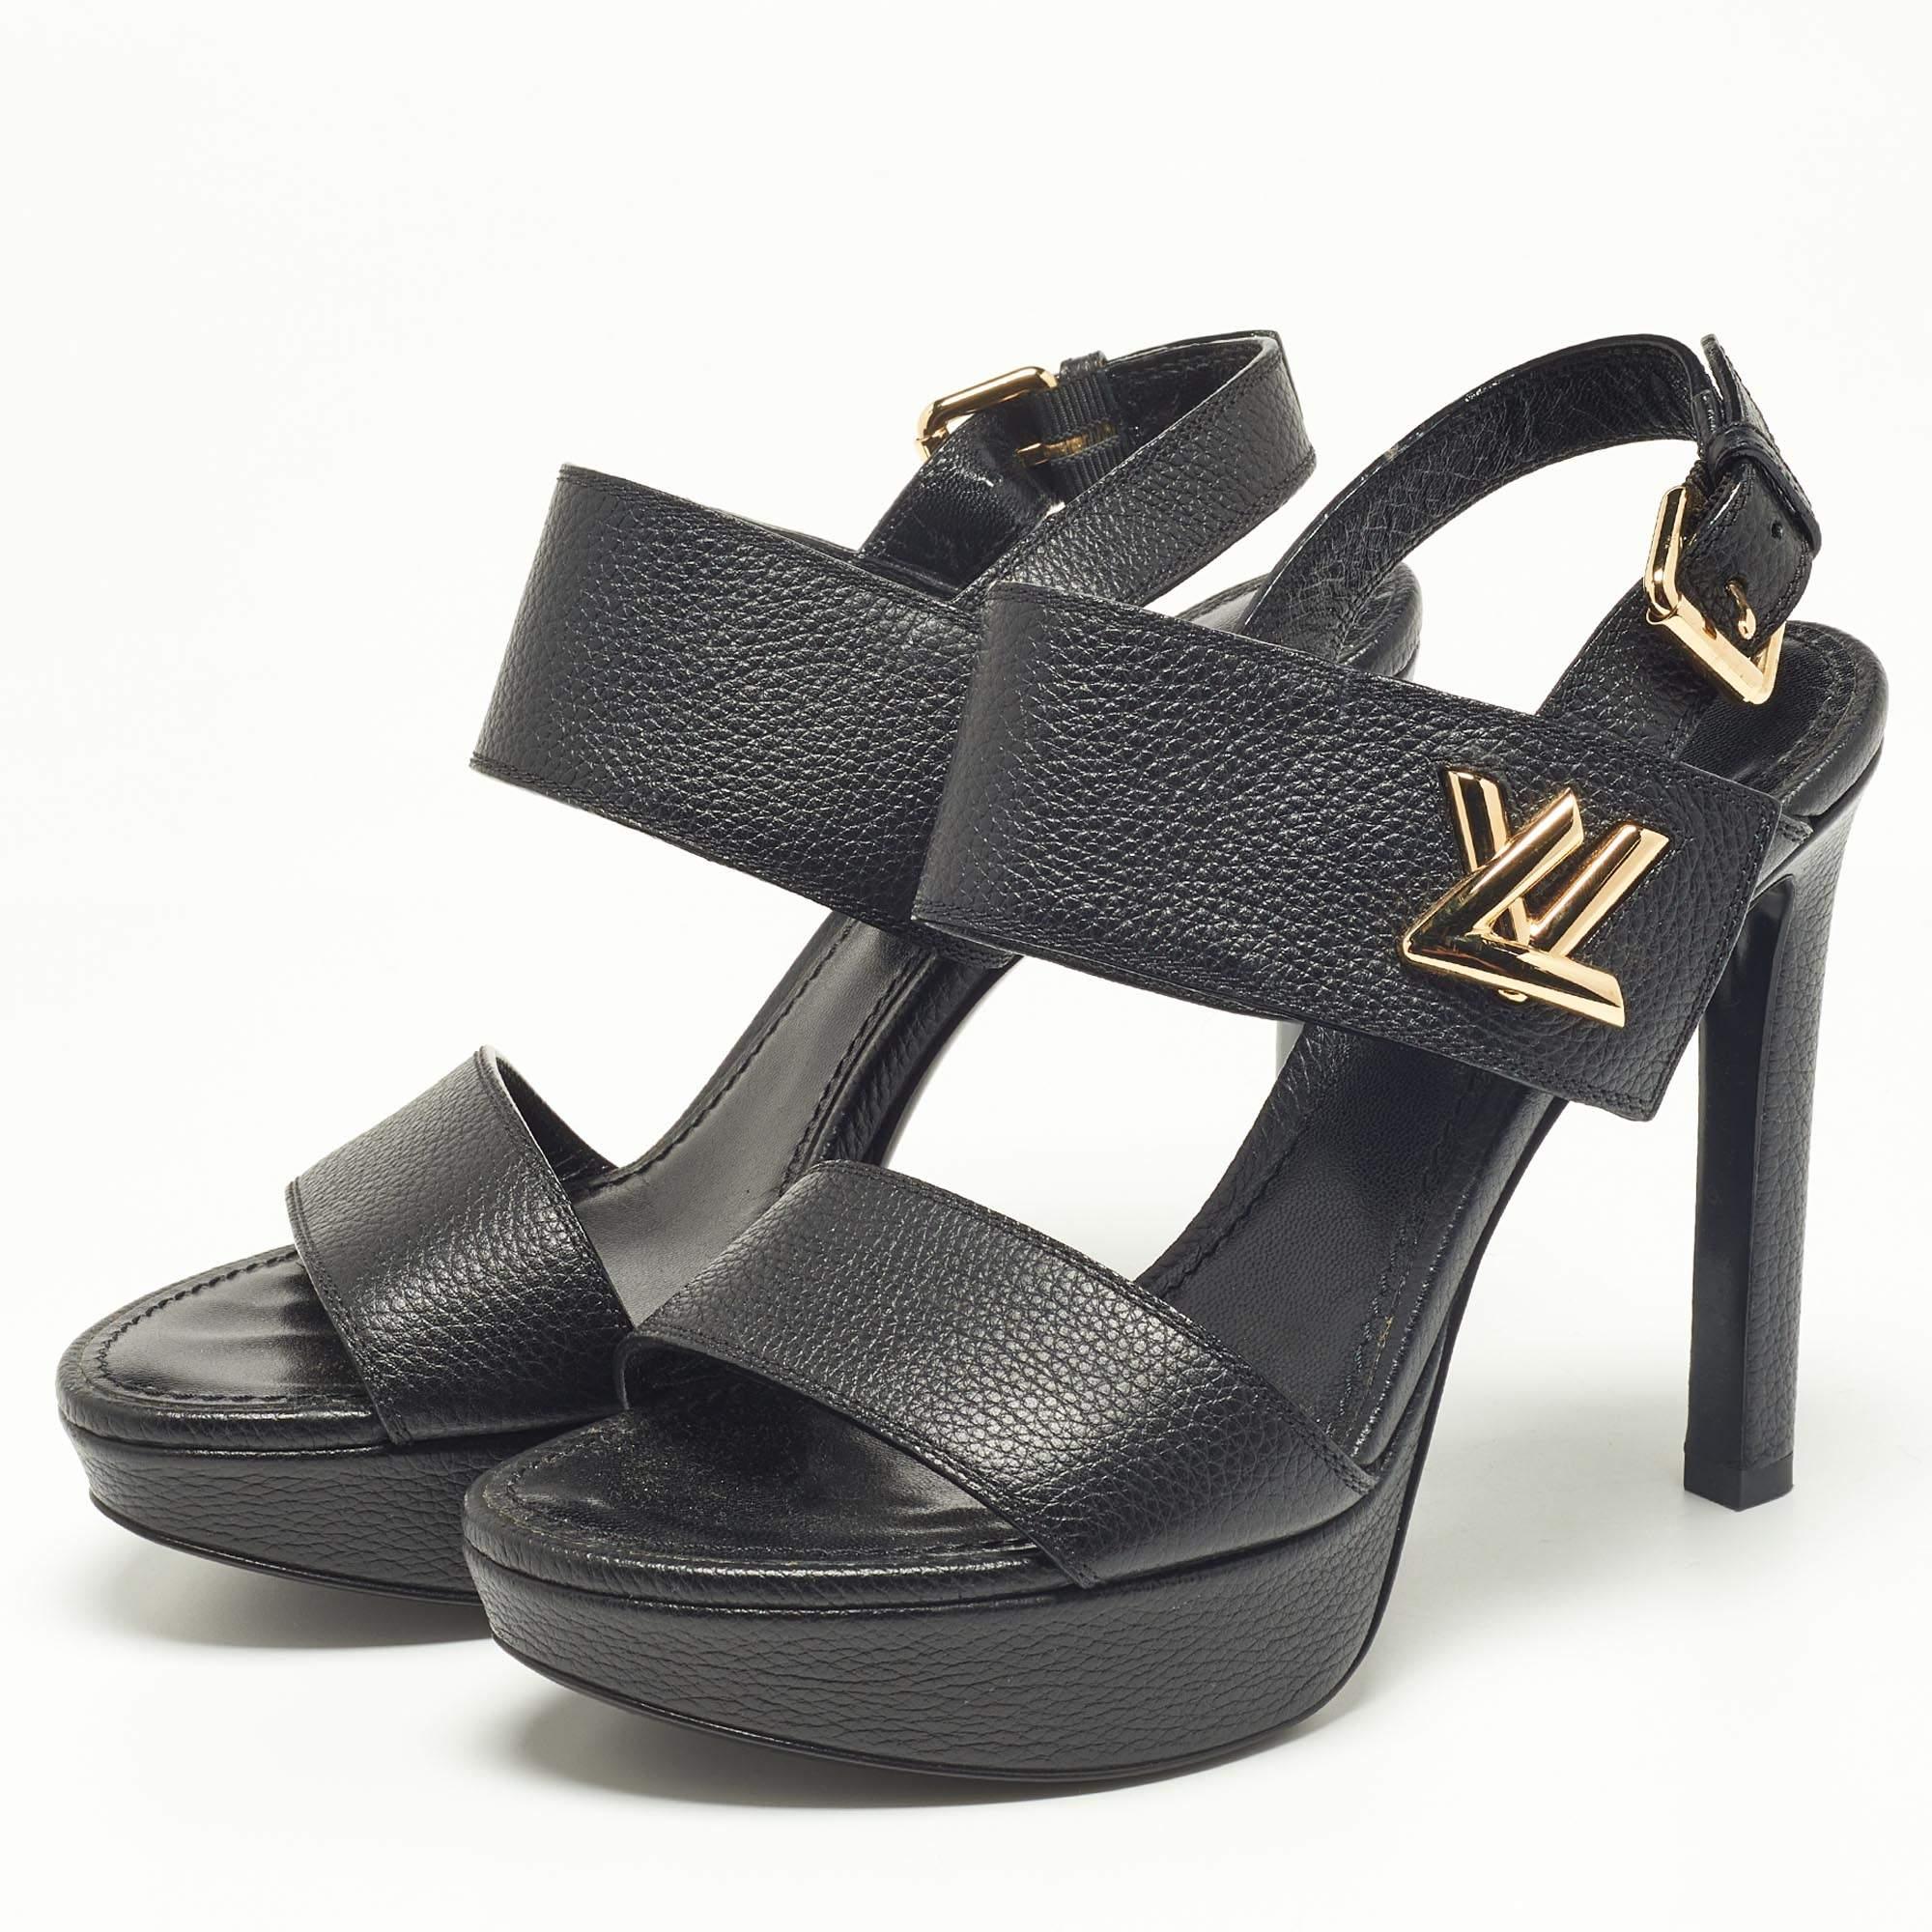 A classic pair of sandals is a must-have in every collection, and when the design is by Louis Vuitton, it is sure to add a statement of luxury to your wardrobe. These sandals are sure to delight!

Includes: Original Dustbag, Extra Heel Tips